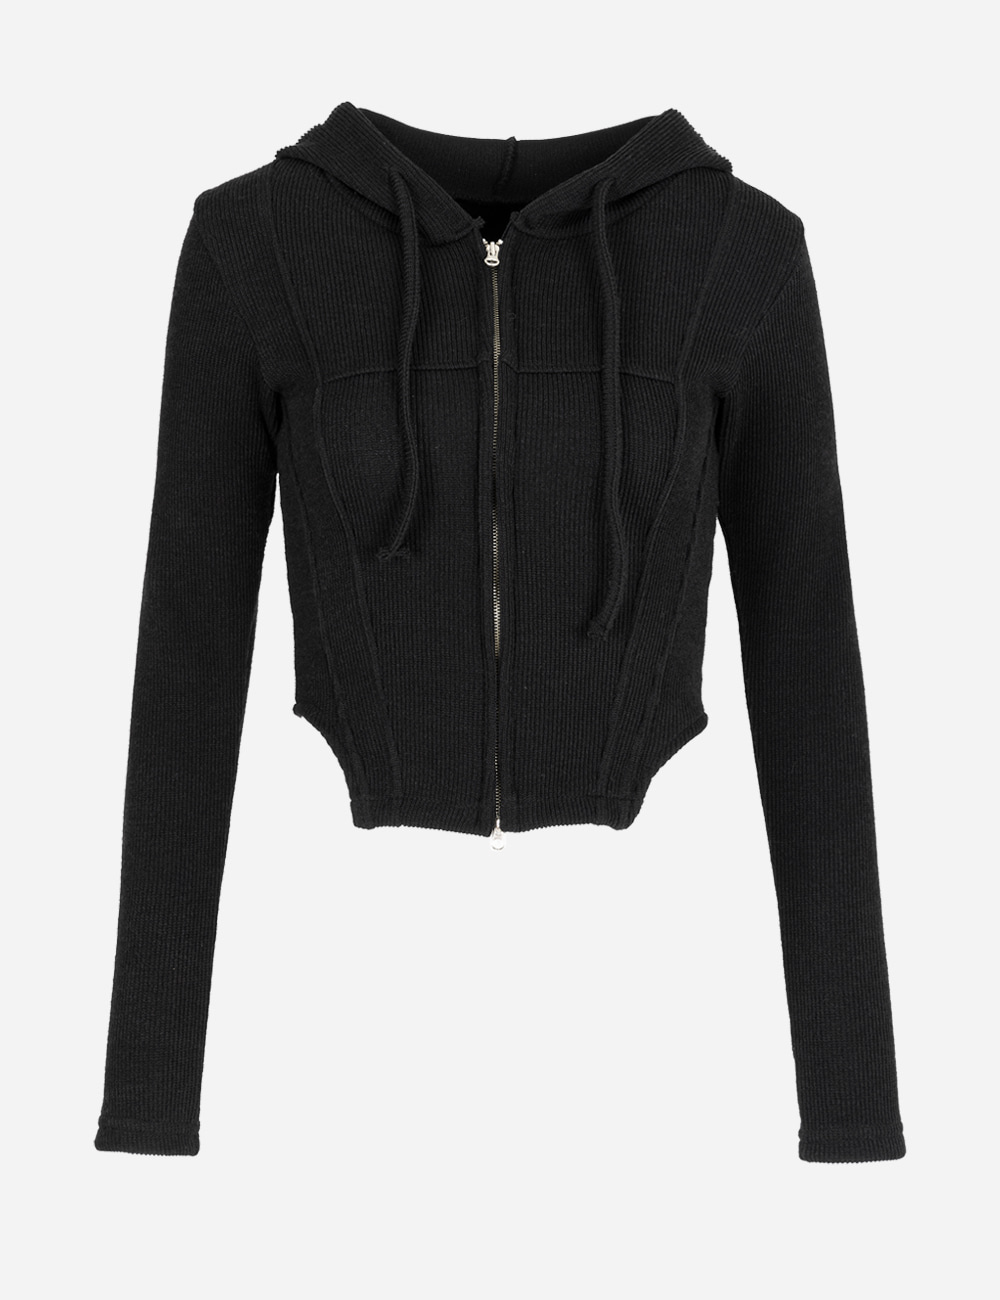 [RESTOCK] RIBBED TWO-WAY HOODED ZIPPER JACKET